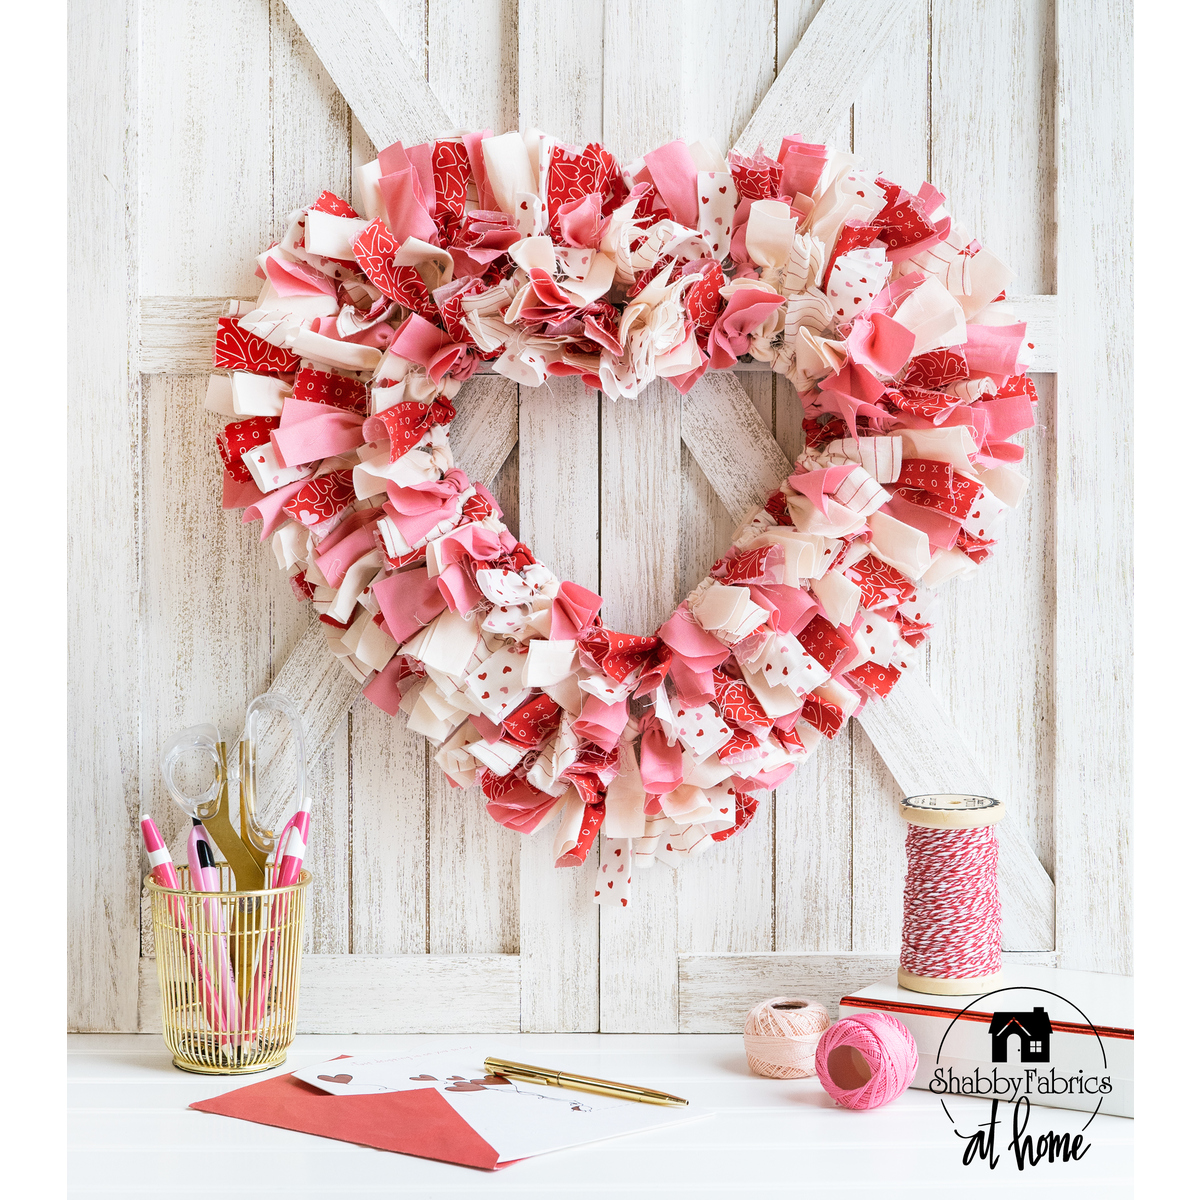 Cross stitch heart charms for Valentine's Day - so quick you can